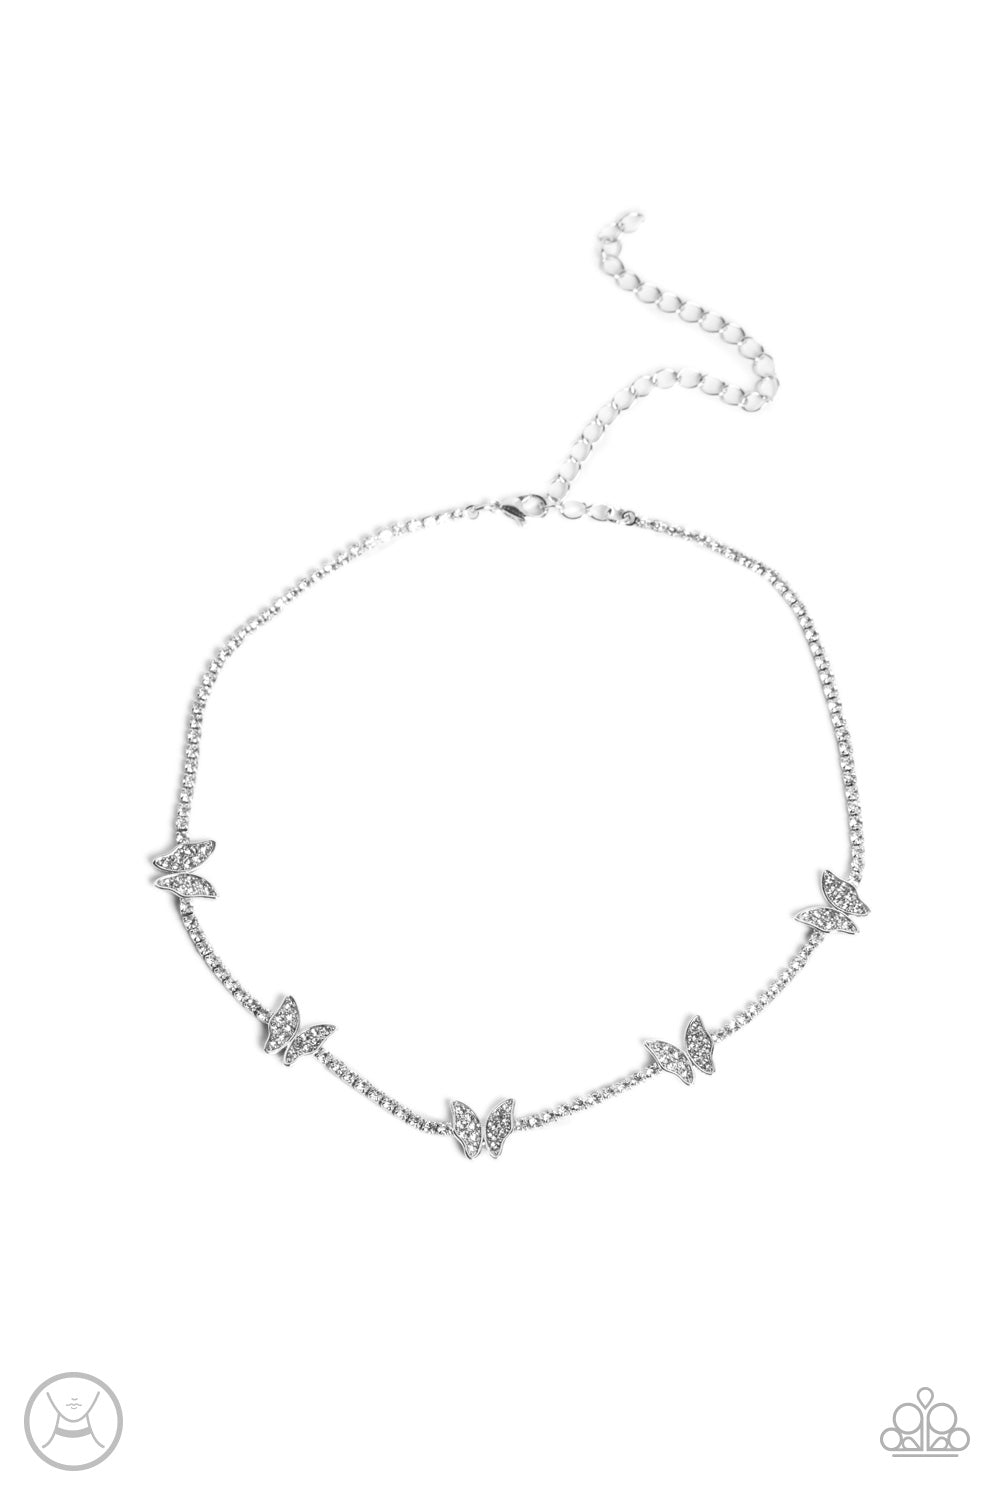 Fluttering Fanatic White Butterfly Choker Necklace - Paparazzi Accessories  Infused along a row of dainty white rhinestones pressed into silver box-chain settings, a collection of silver butterflies coalesces around the neckline for a whimsical finish. Each butterfly features a dainty shimmer of white rhinestones on its wings, for a sparkly statement. Features an adjustable clasp closure.  Sold as one individual choker necklace. Includes one pair of matching earrings.  P2CH-WTXX-057XX